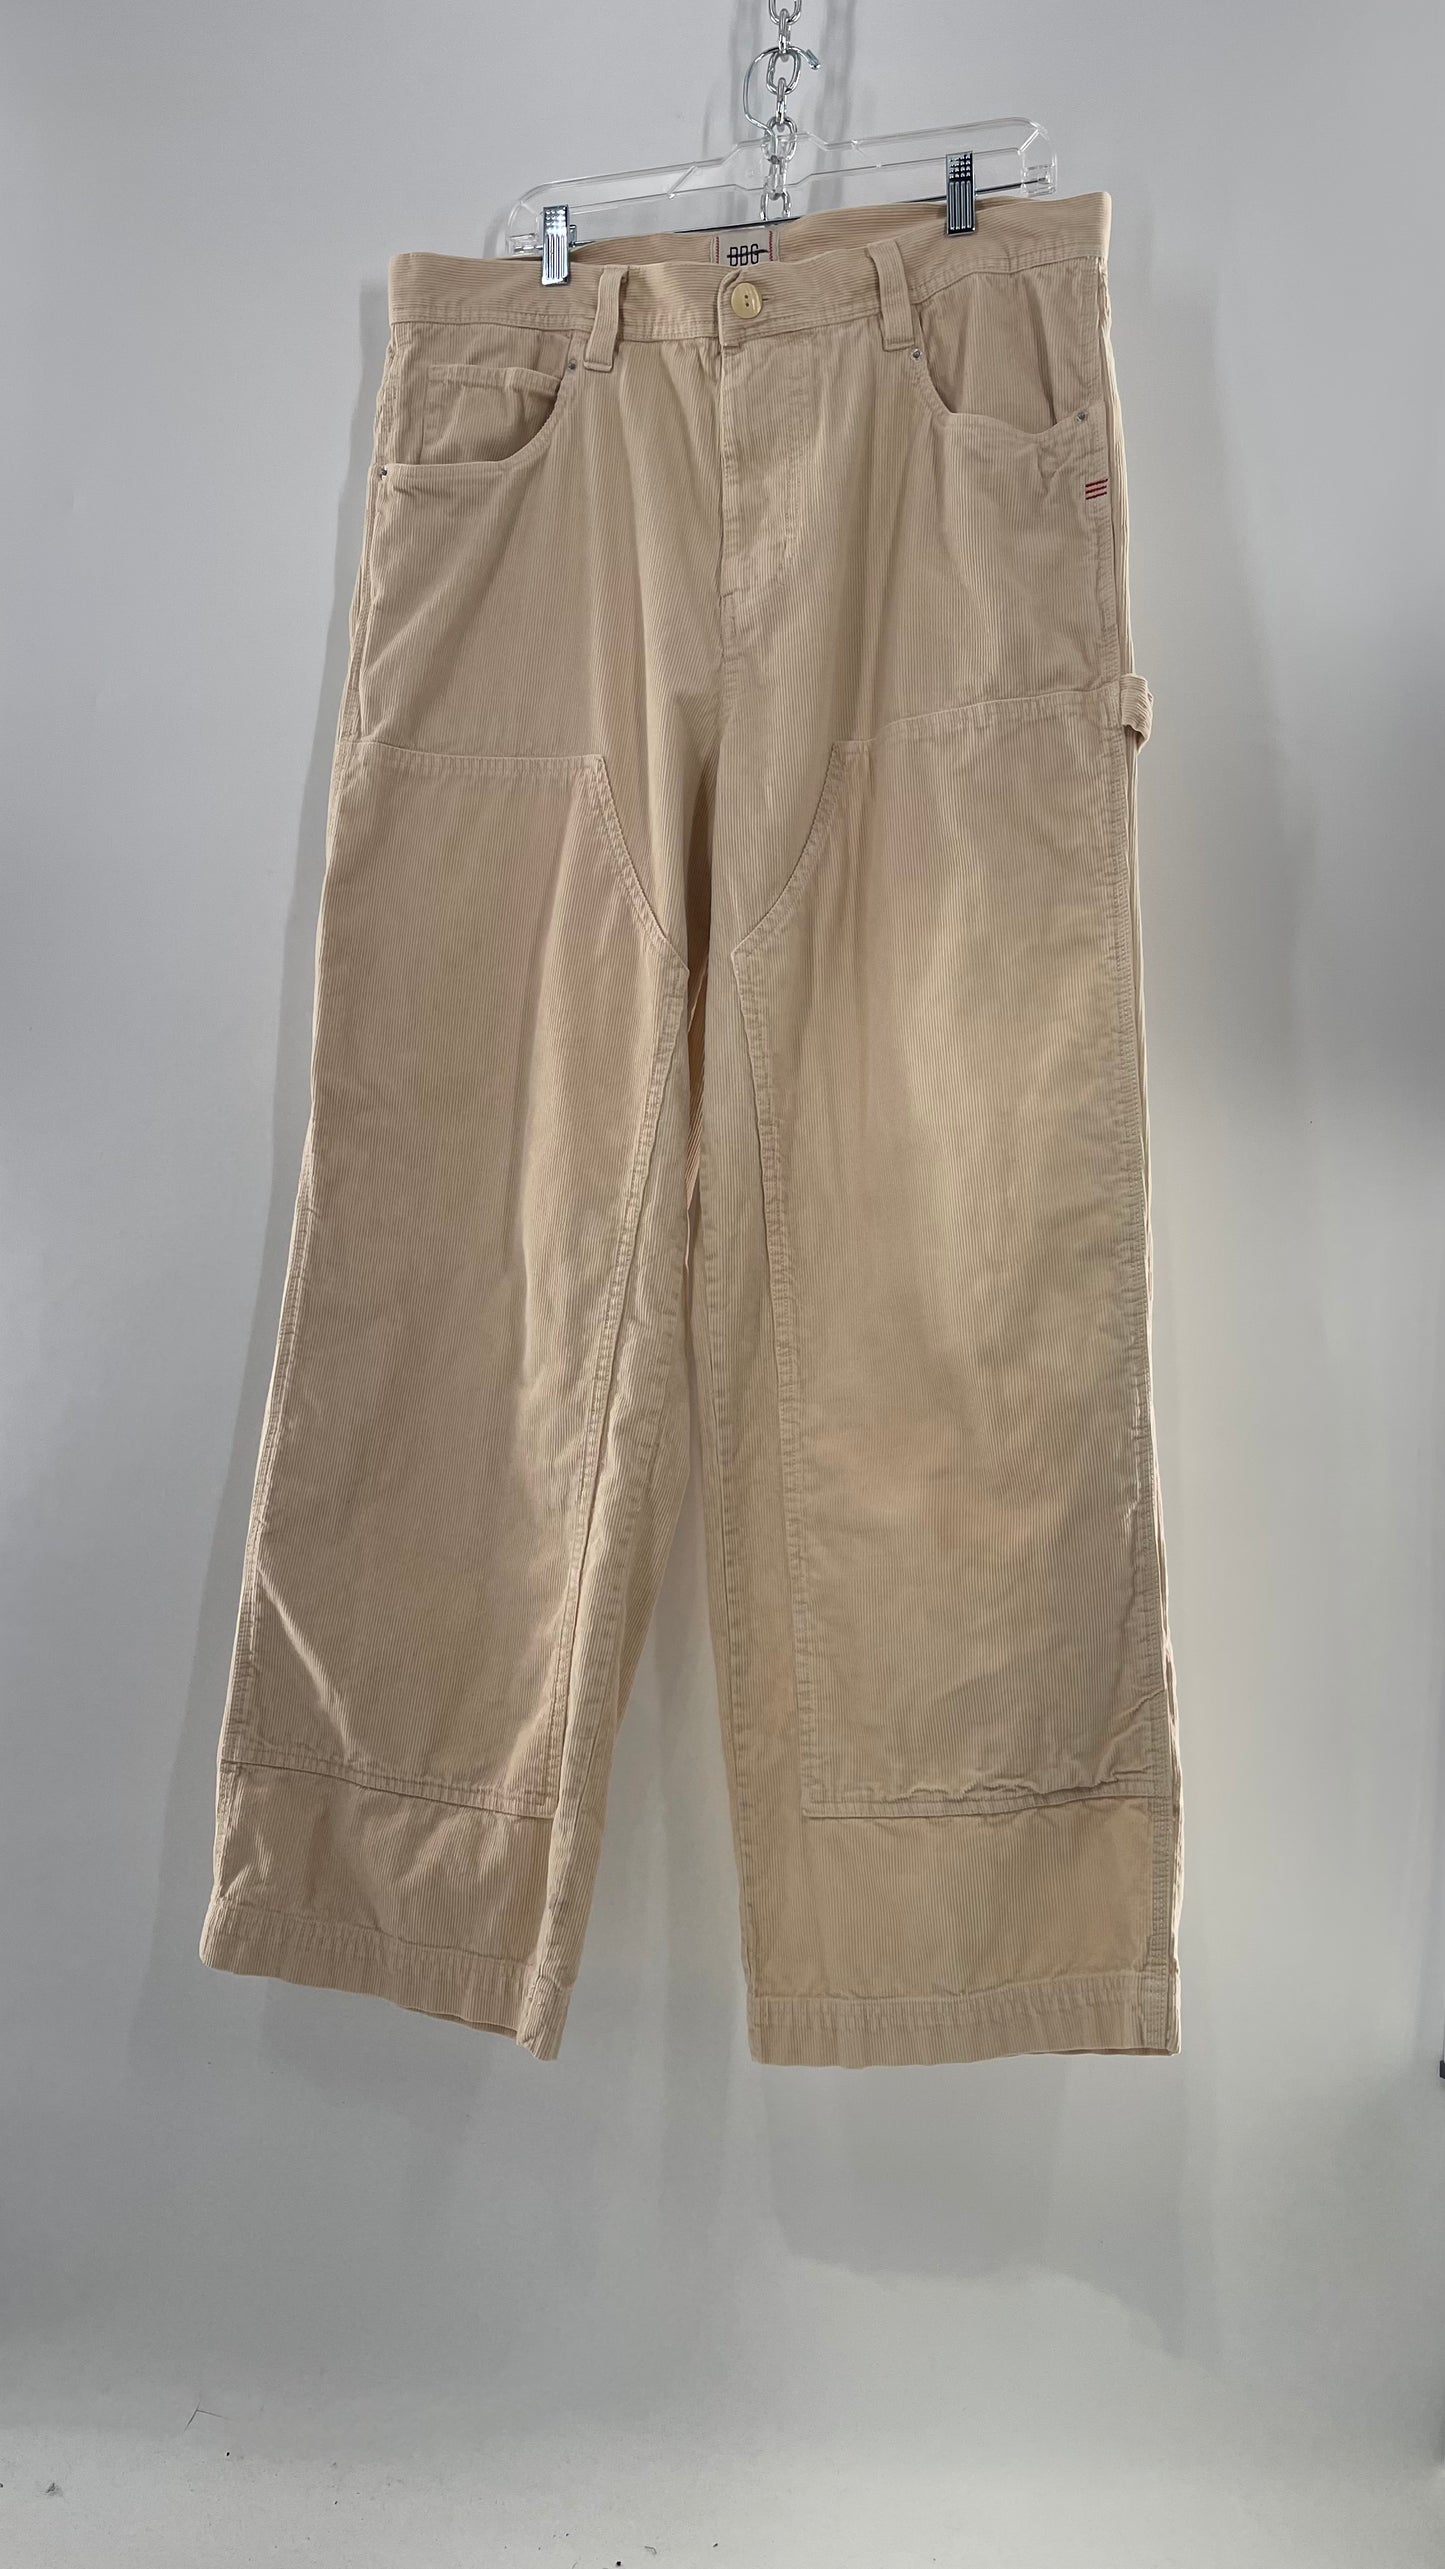 Urban Outfitters BDG Beige Corduroy Cargos with Leg Patches (36)